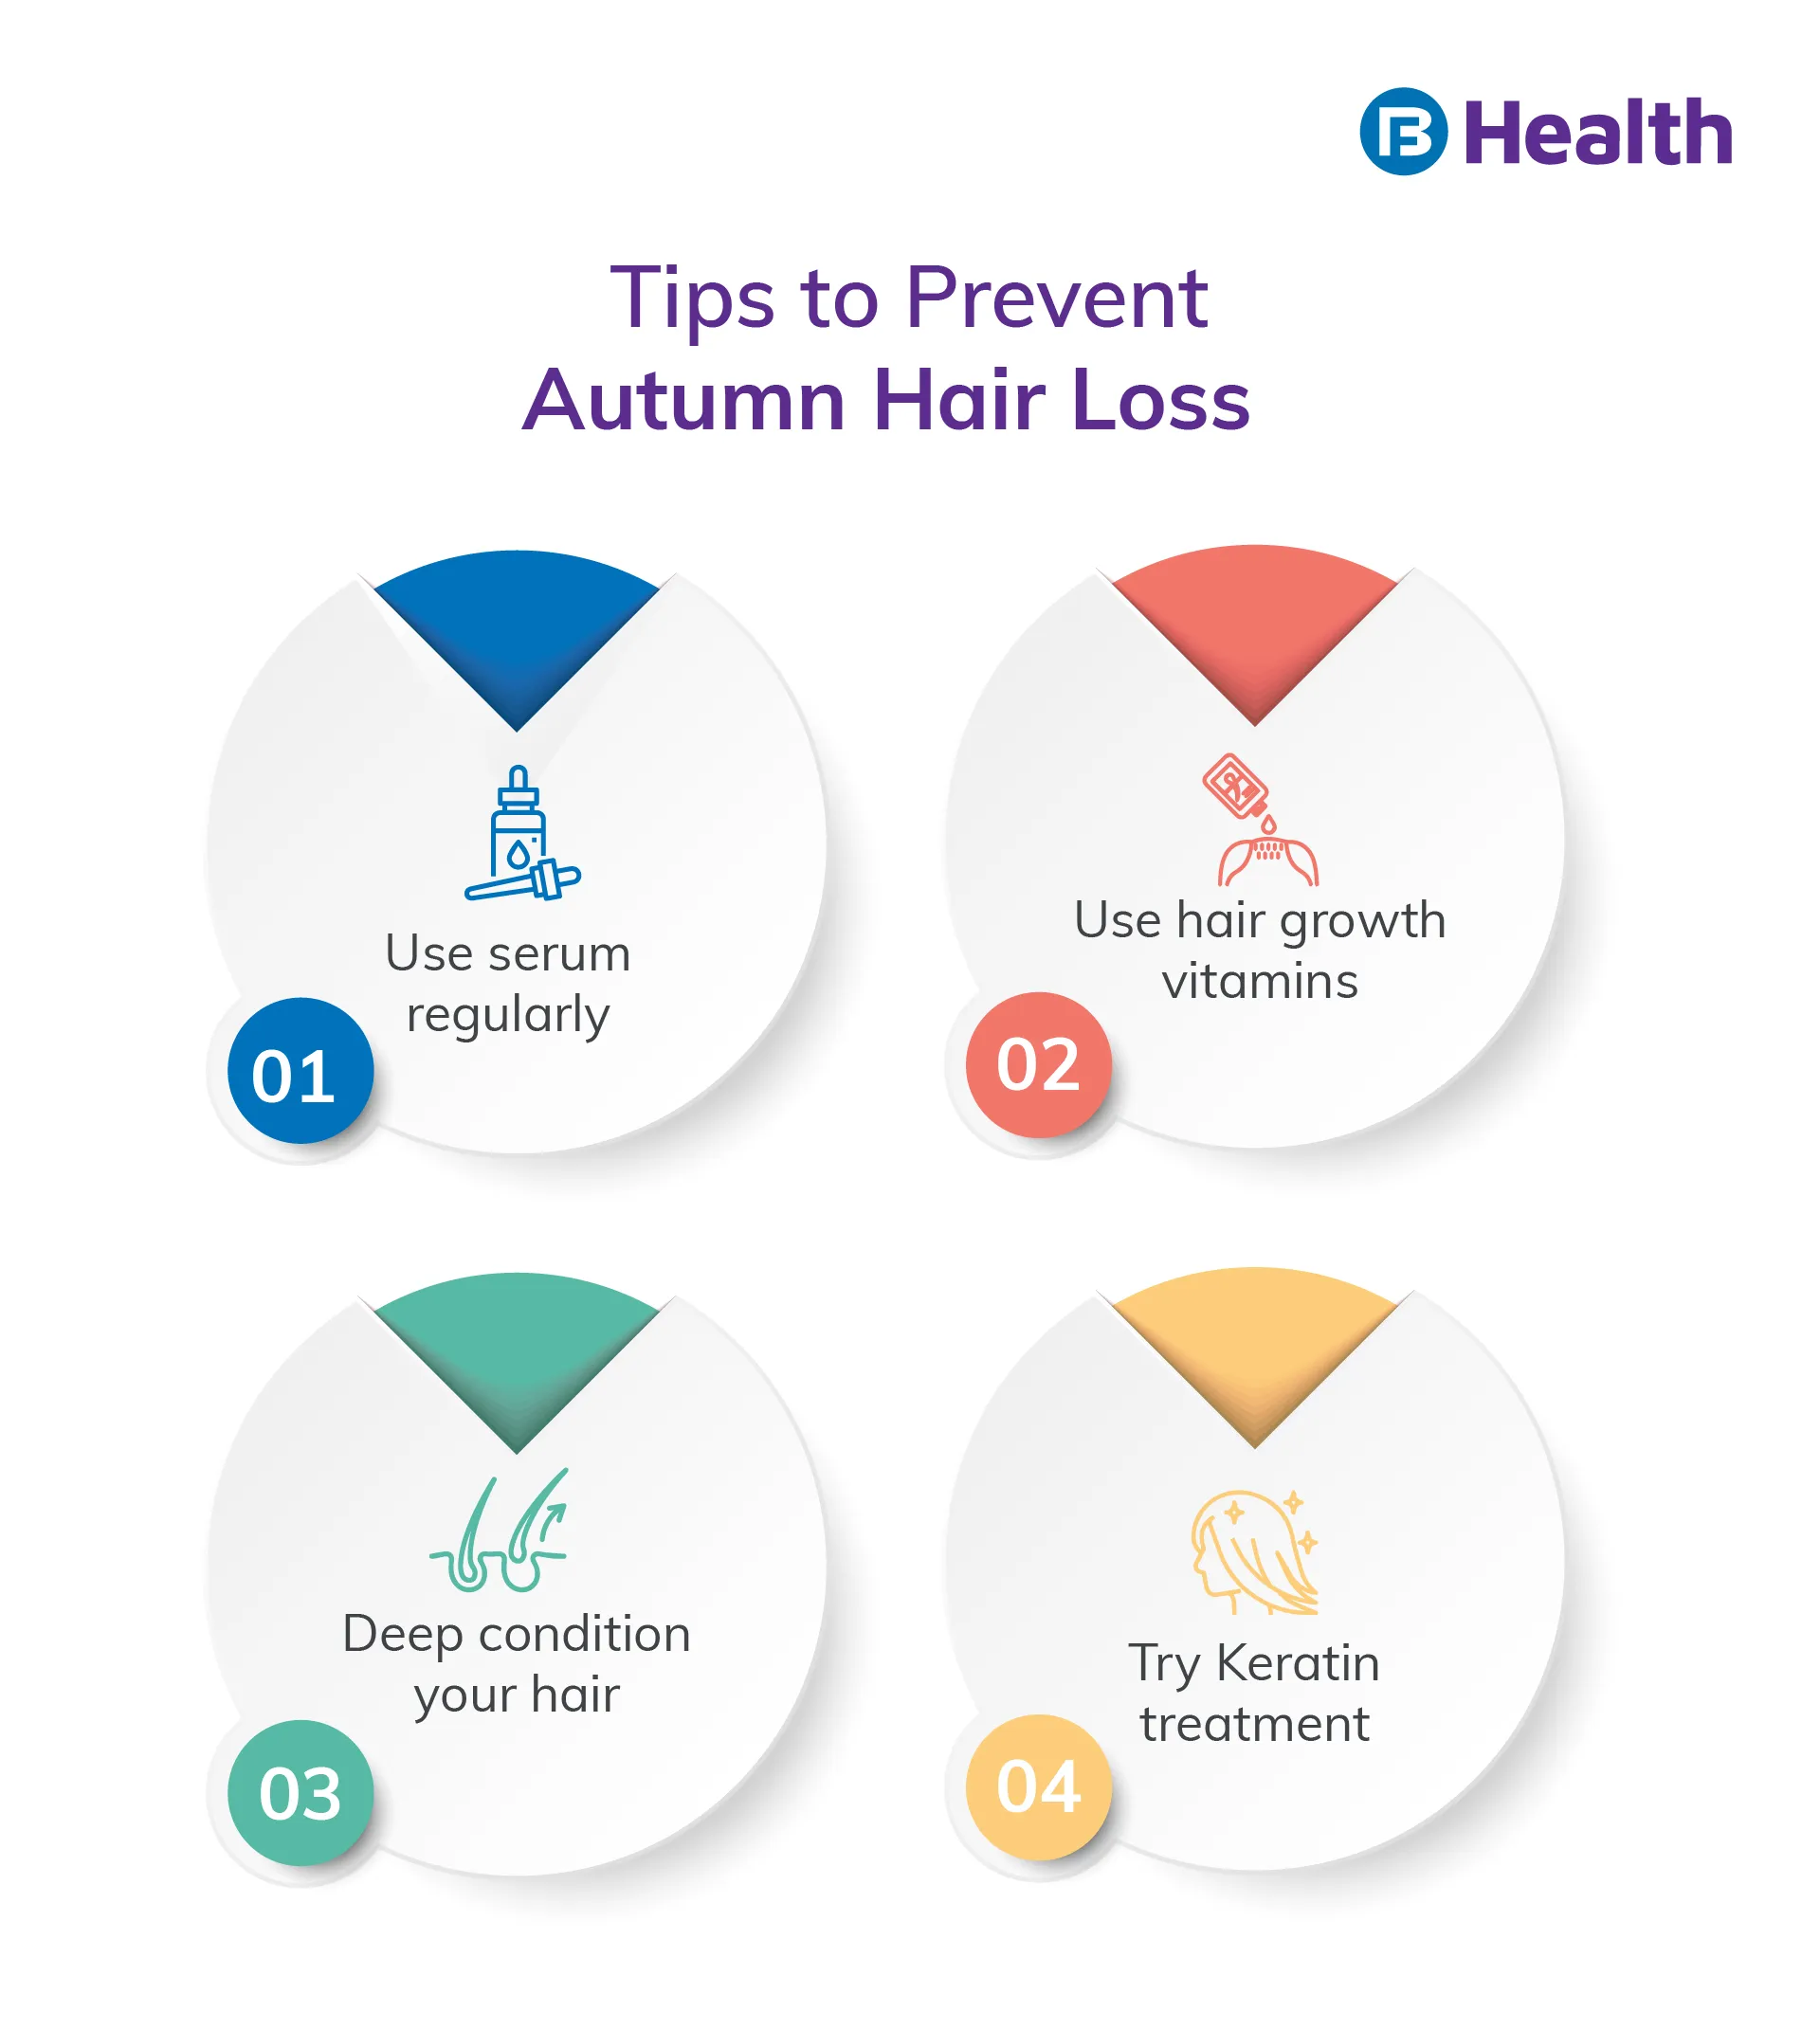 Tips to prevent Autumn hair loss